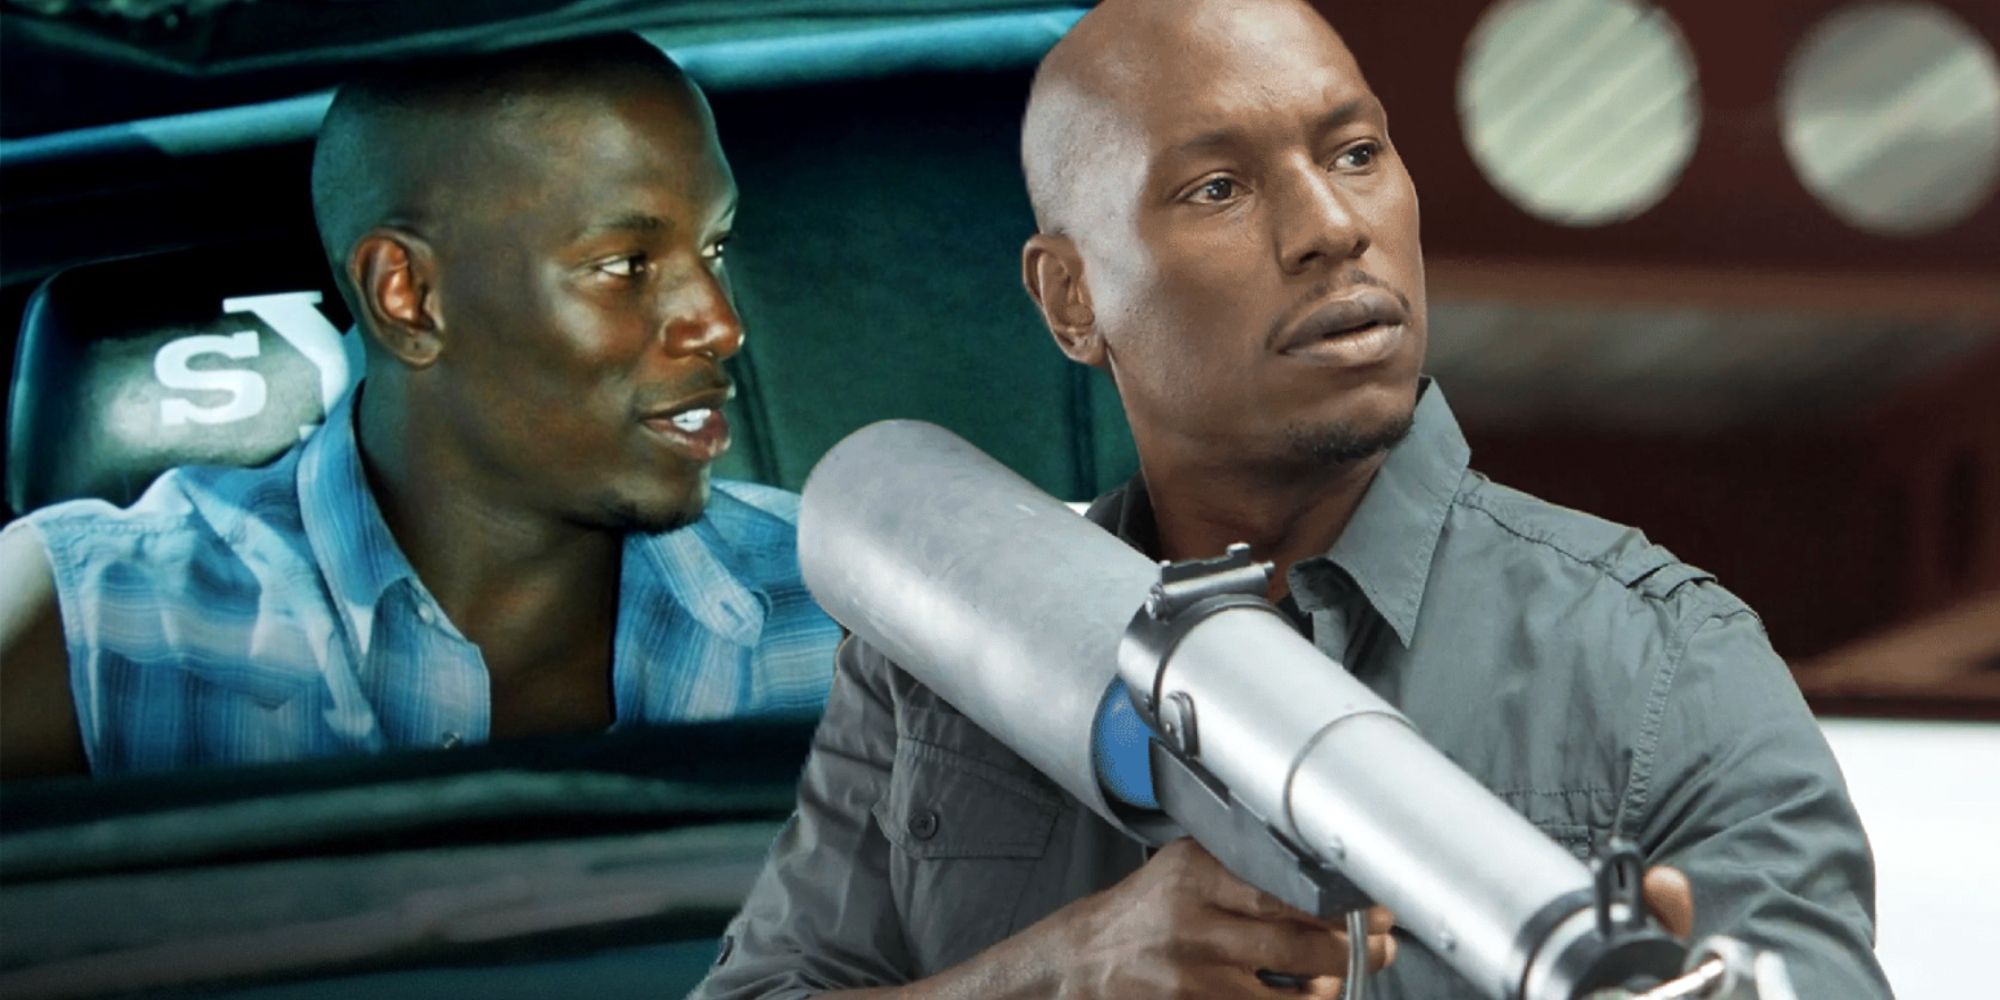 Tyrese as Roman Pearce in 2 Fast 2 Furious and Fast & Furious 6